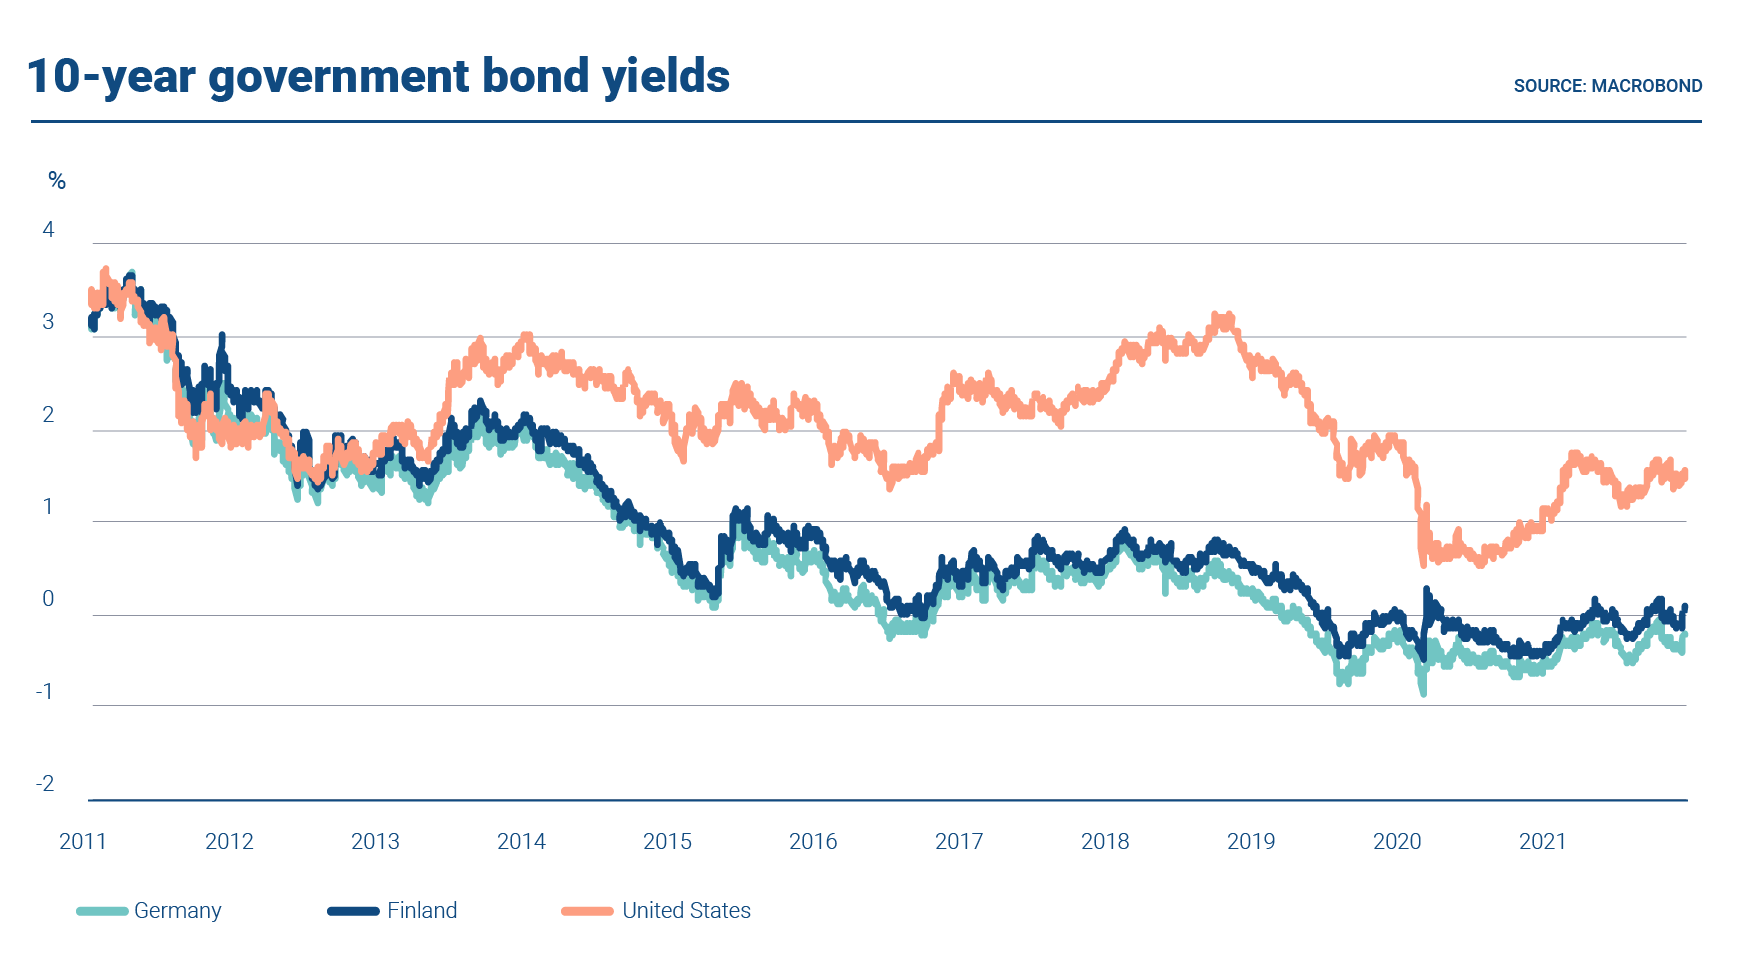 The graph shows the 10-year government bond yields of Germany, Finland and the United States in 2011-21.